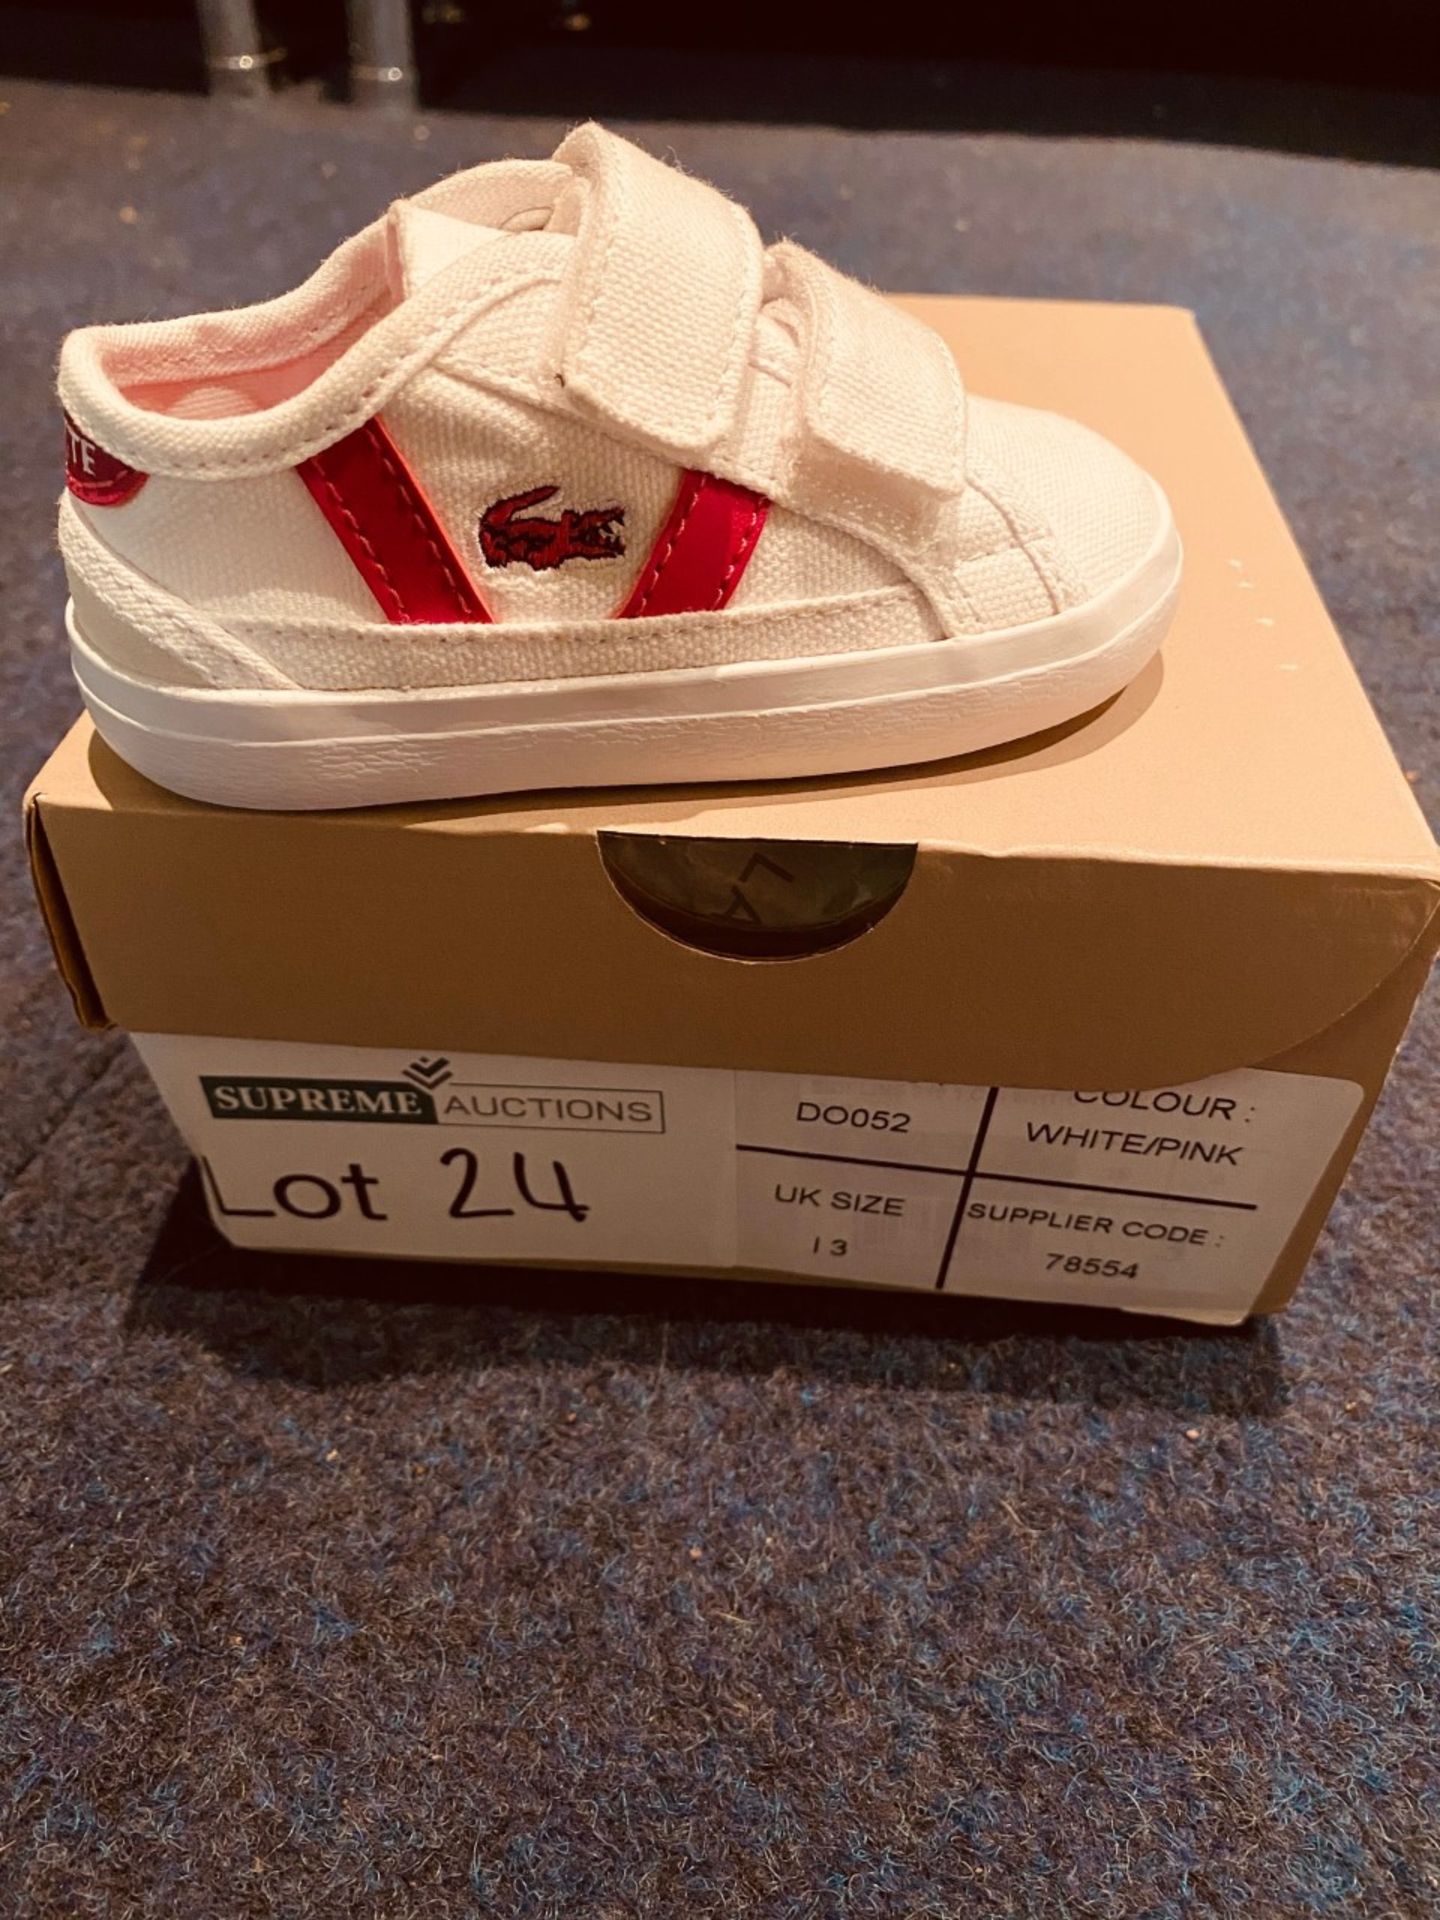 NEW AND BOXED LACOSTE WHITE/PINK UK13